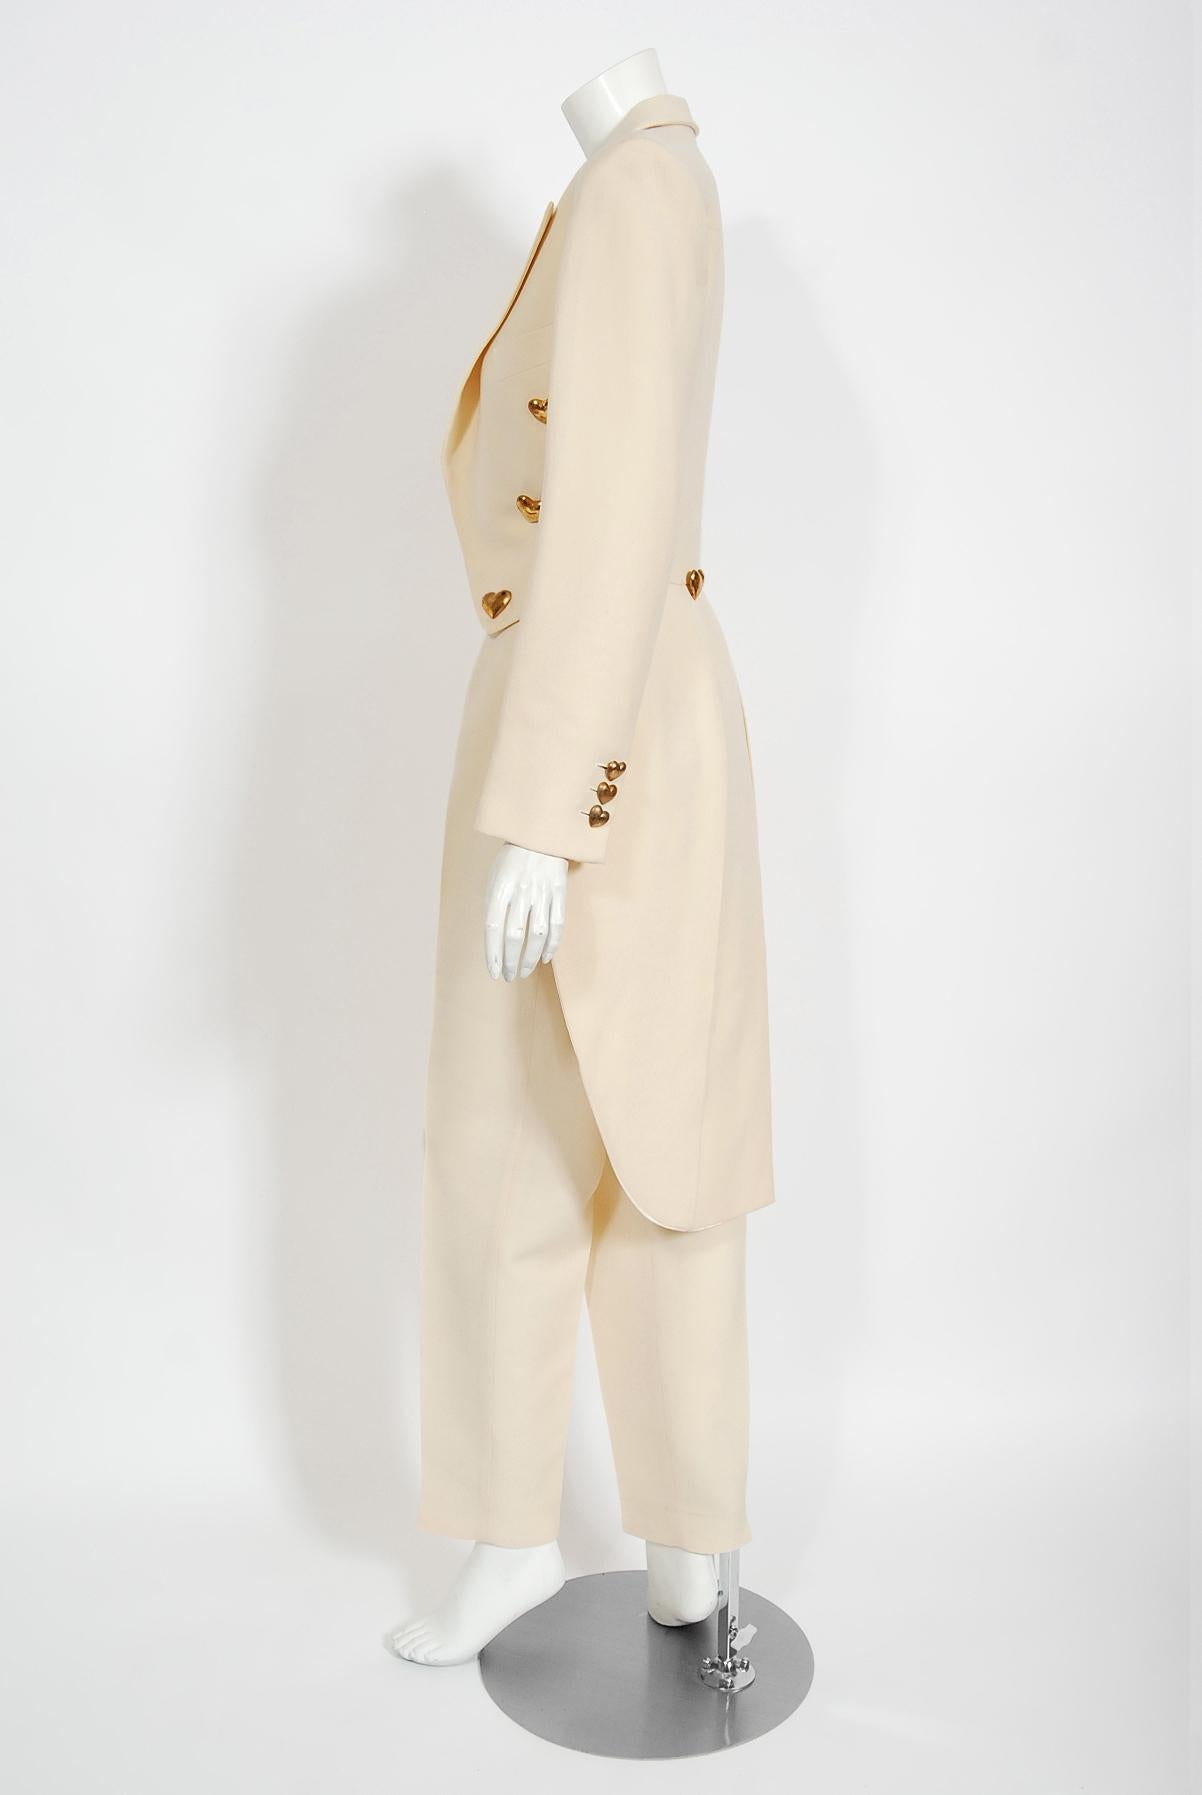 Vintage 1993 Moschino Couture Cream Wool Heart Buttons Tuxedo Jacket & Pants Set 2